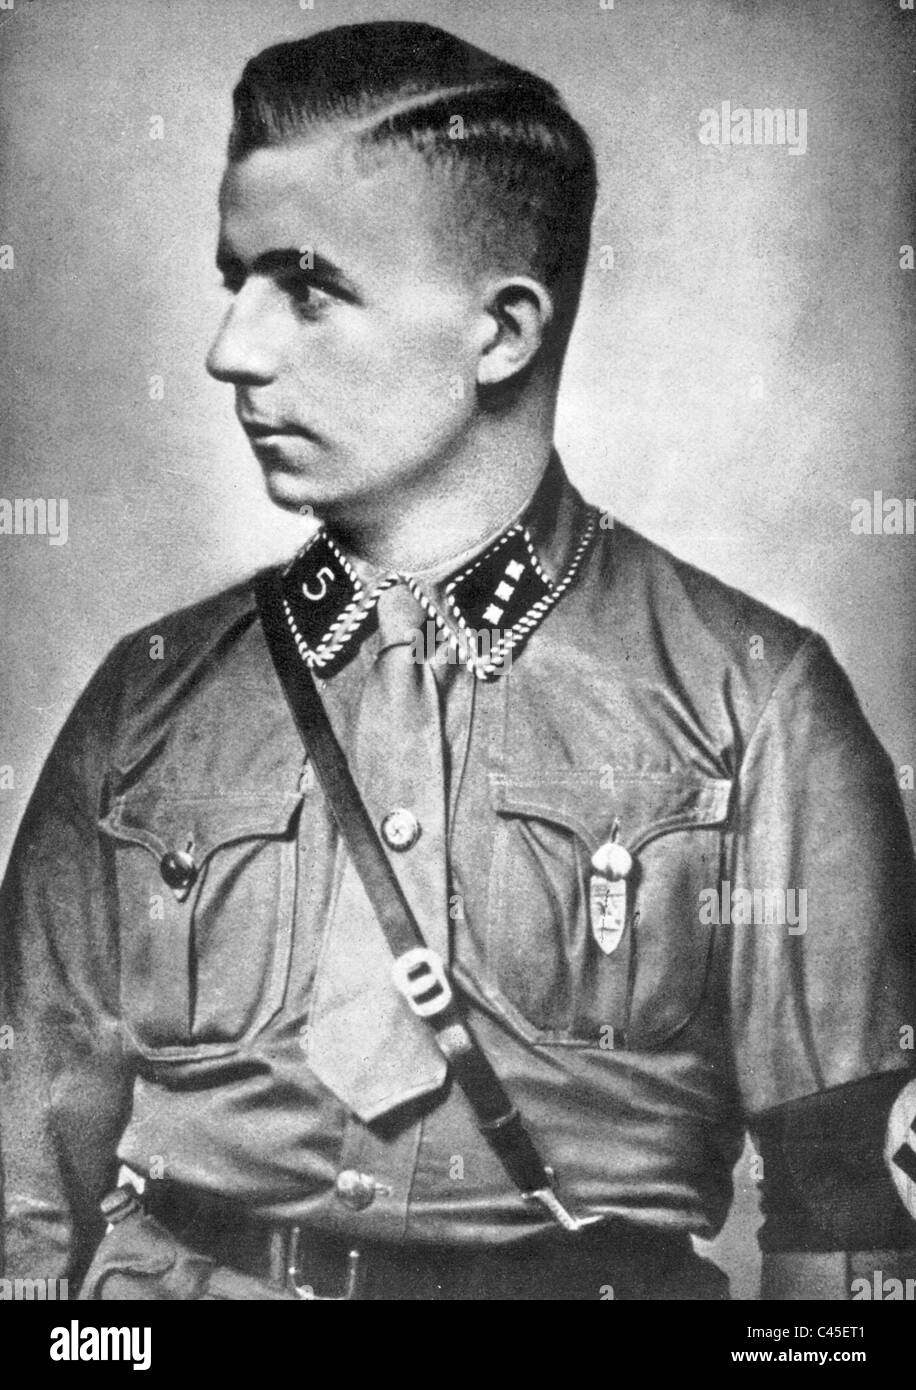 Get Pdf Horst Wessel - horst wessel lied roblox audio